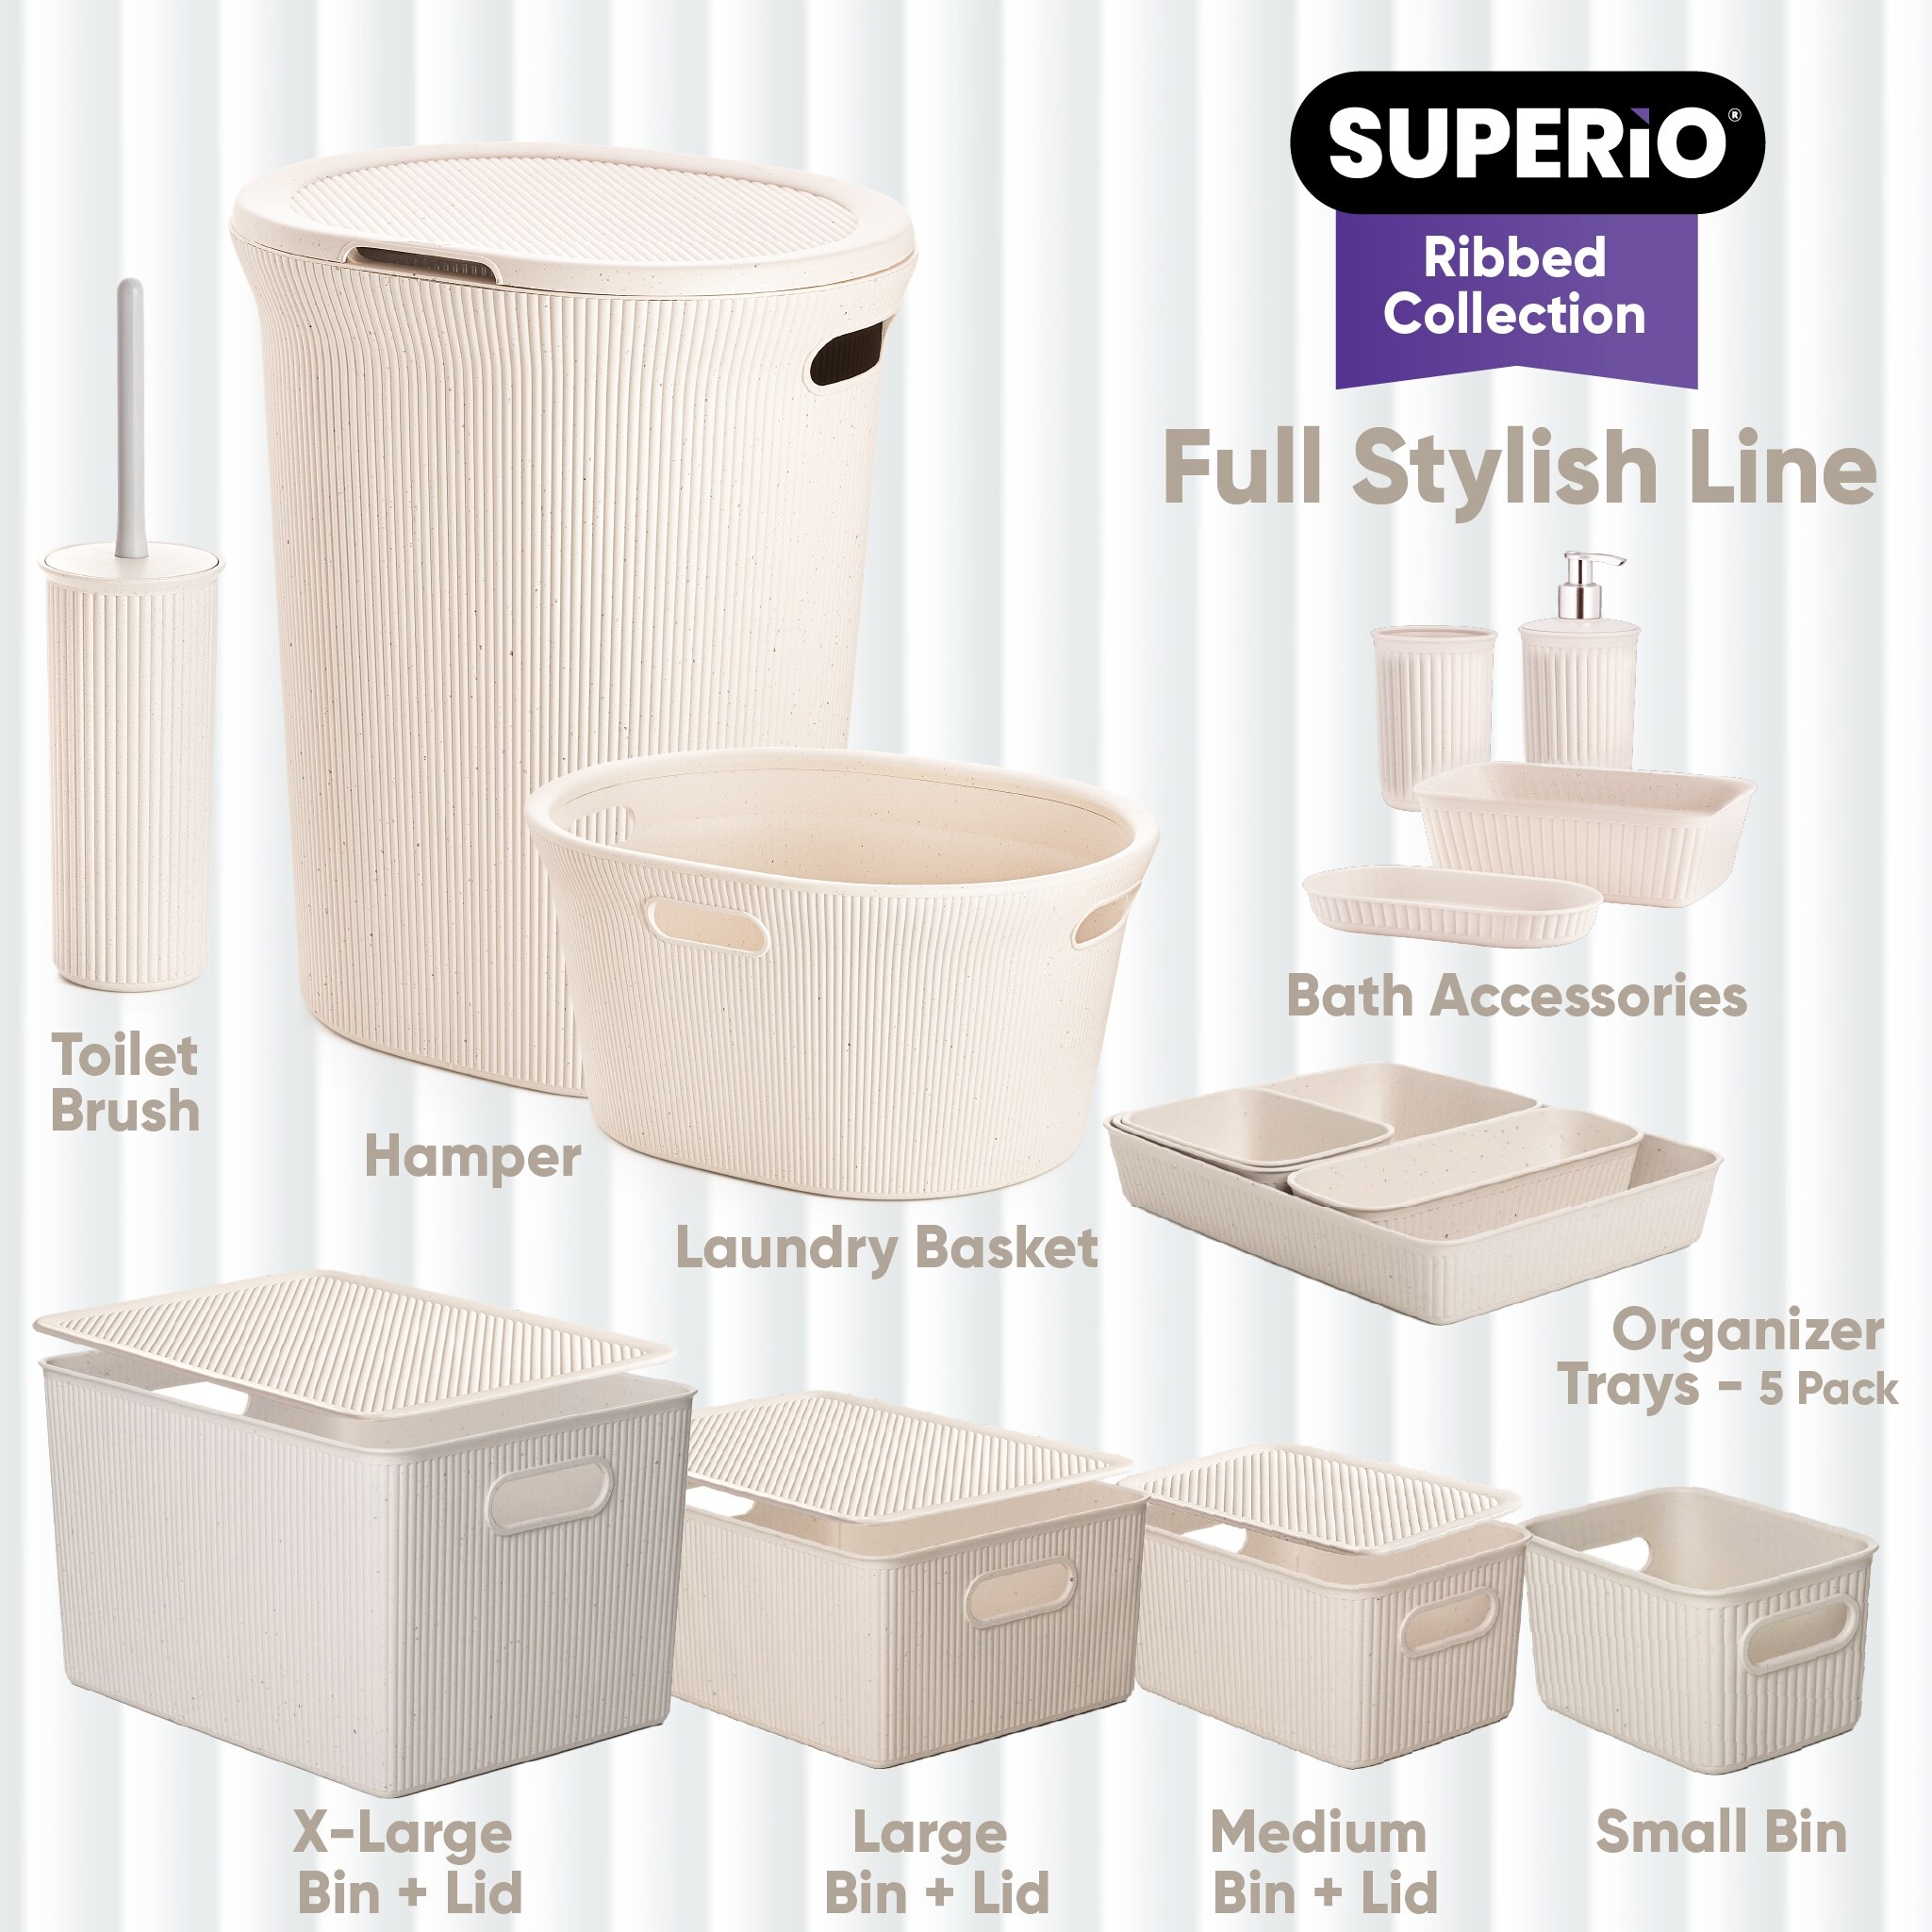 Superio Ribbed Bathroom Accessory Set, 4 pack - 6.26"W x 6.54"D x 4.41"H